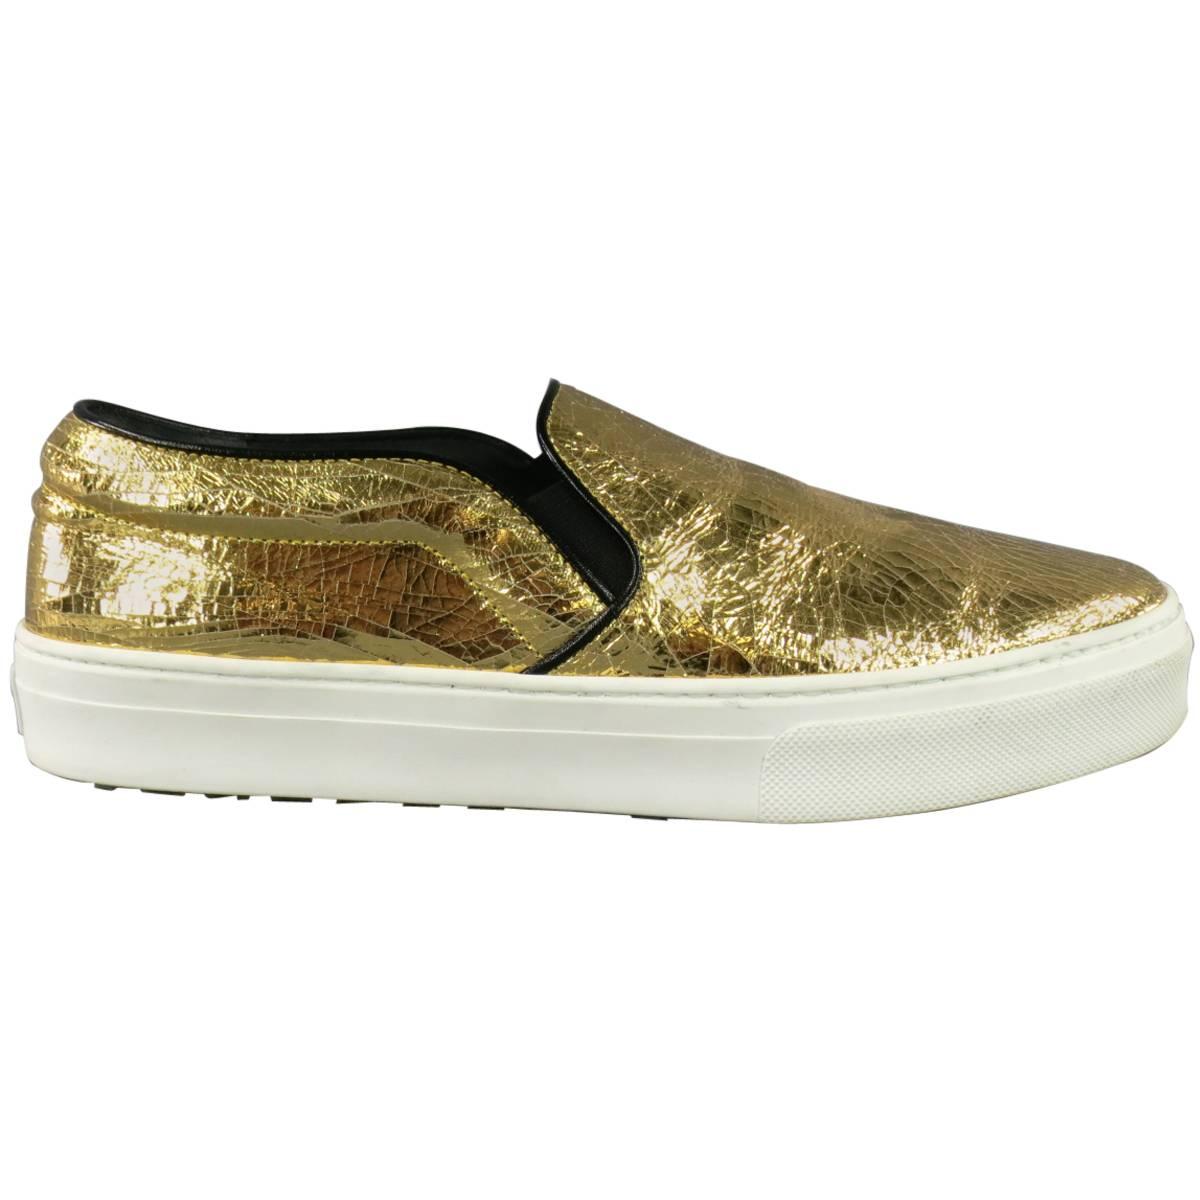 CELINE Size 10 Metallic Gold Crackle Leather Slip On Sneakers